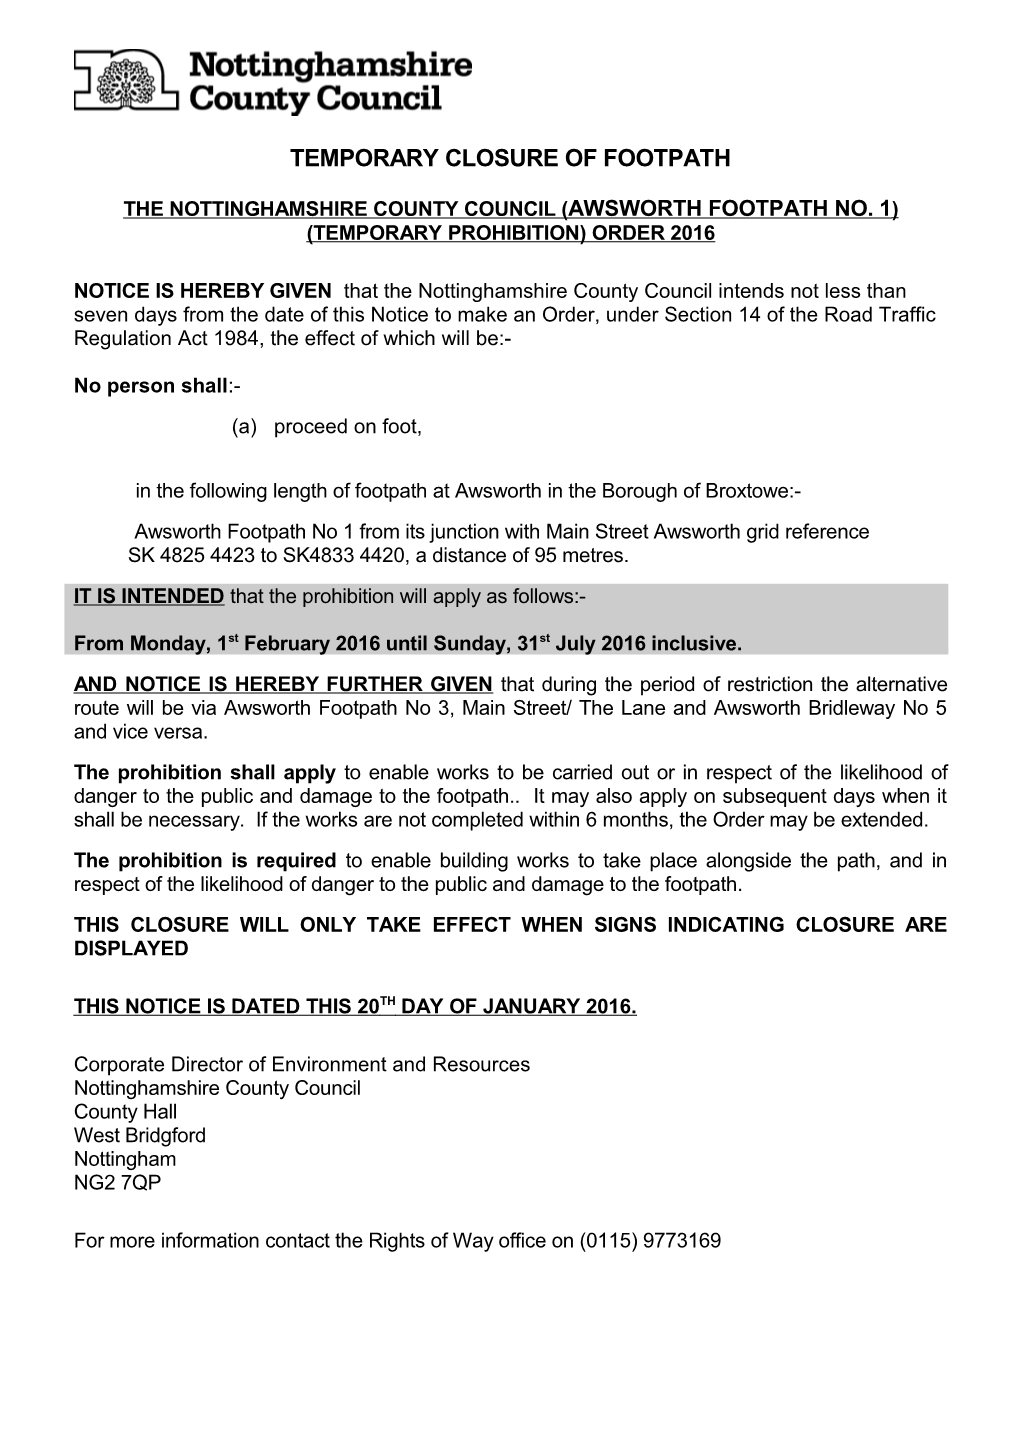 The Nottinghamshire County Council (Awsworth Footpath No. 1) (Temporary Prohibition) Order